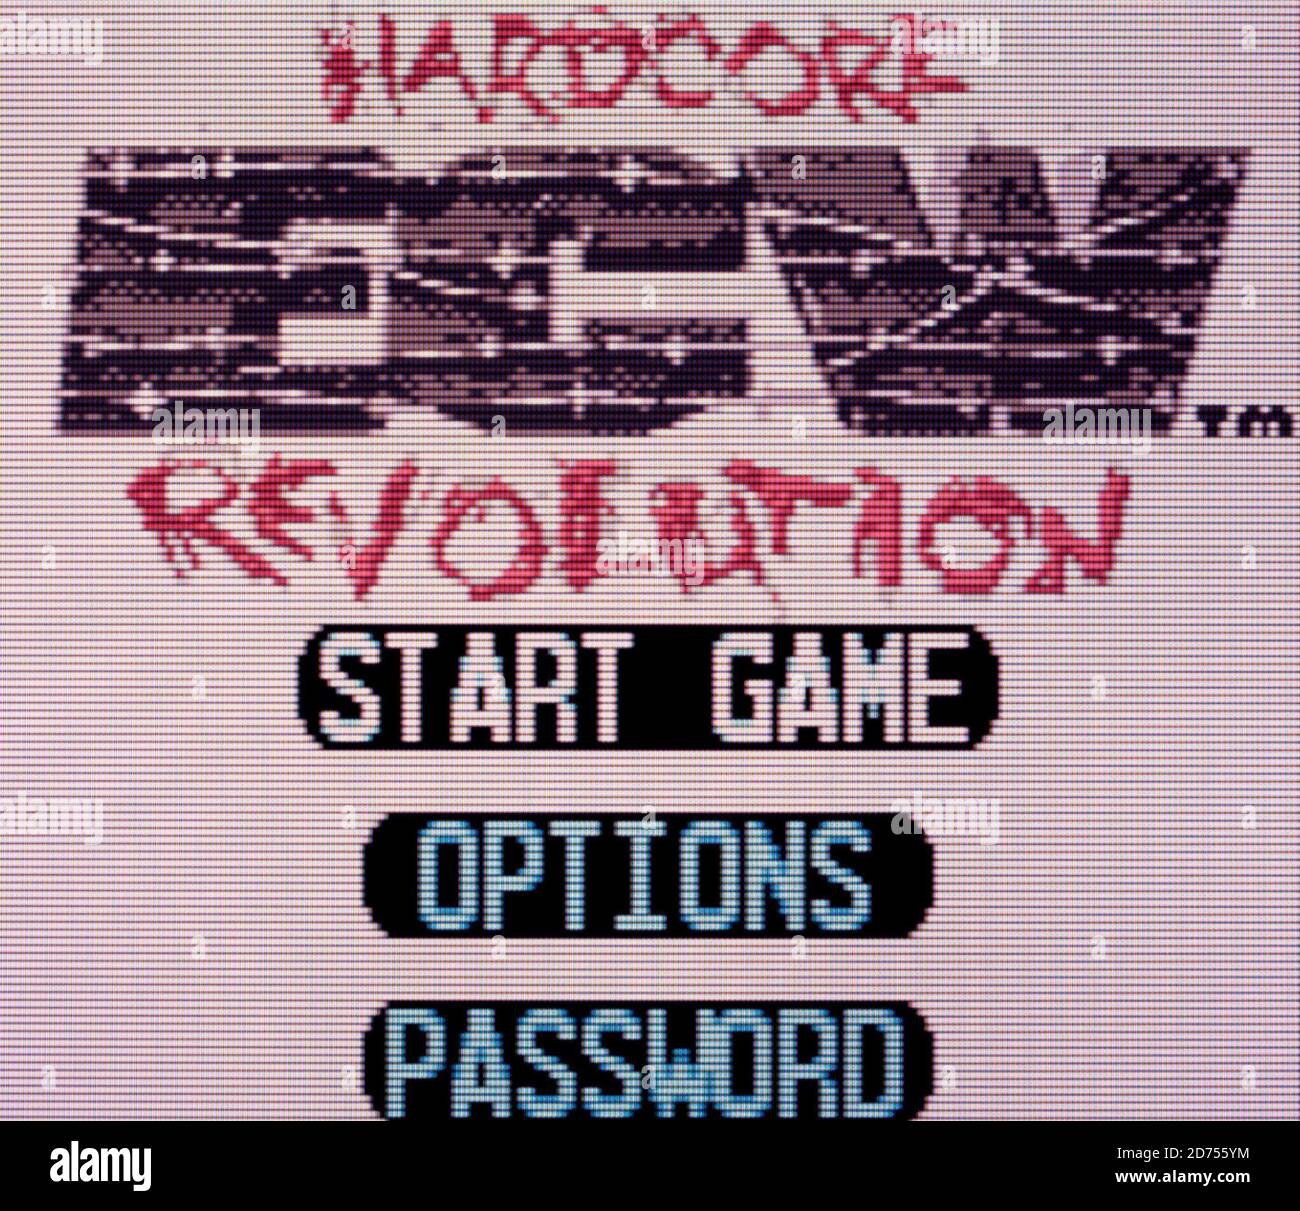 ECW Hardcore Revolution - Nintendo Game Boy Color Videogame - Editorial use only Stock Photo